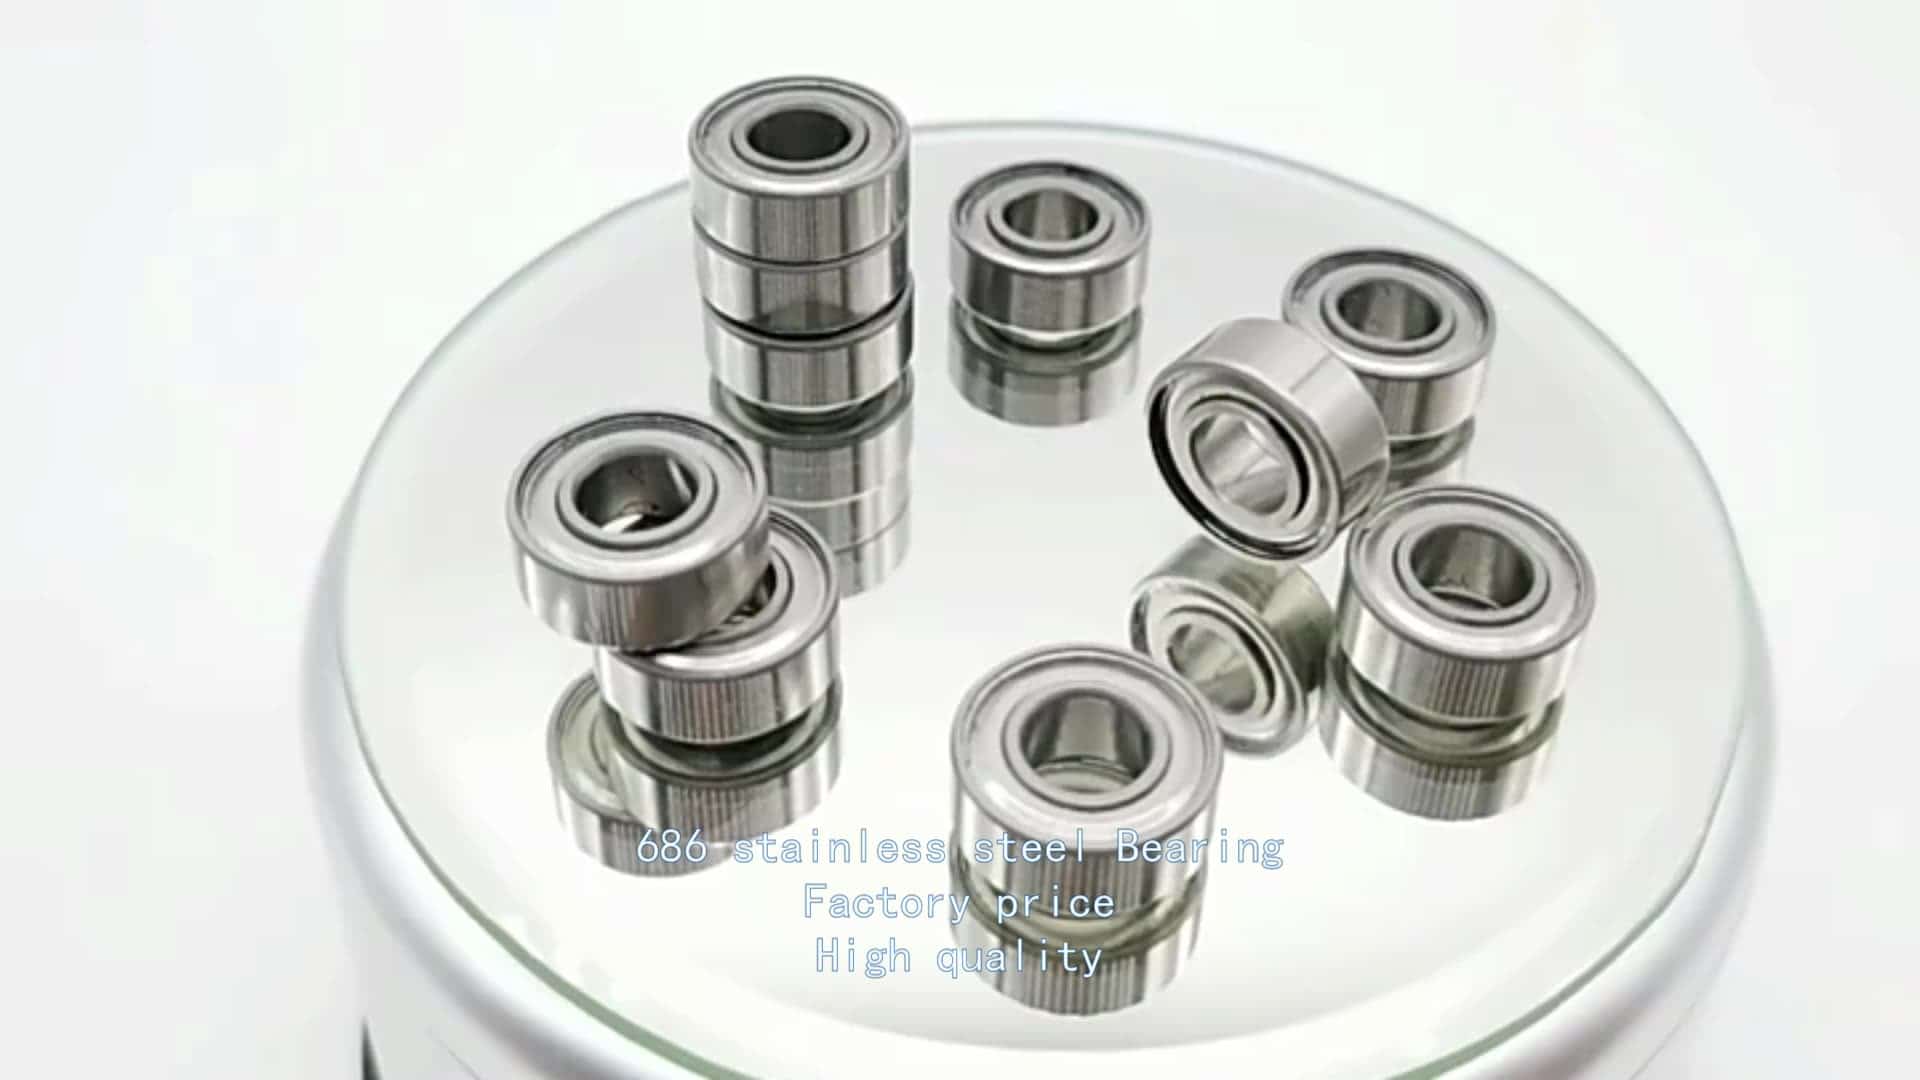 SMR128 MR128 miniature thin walled stainless steel bearing